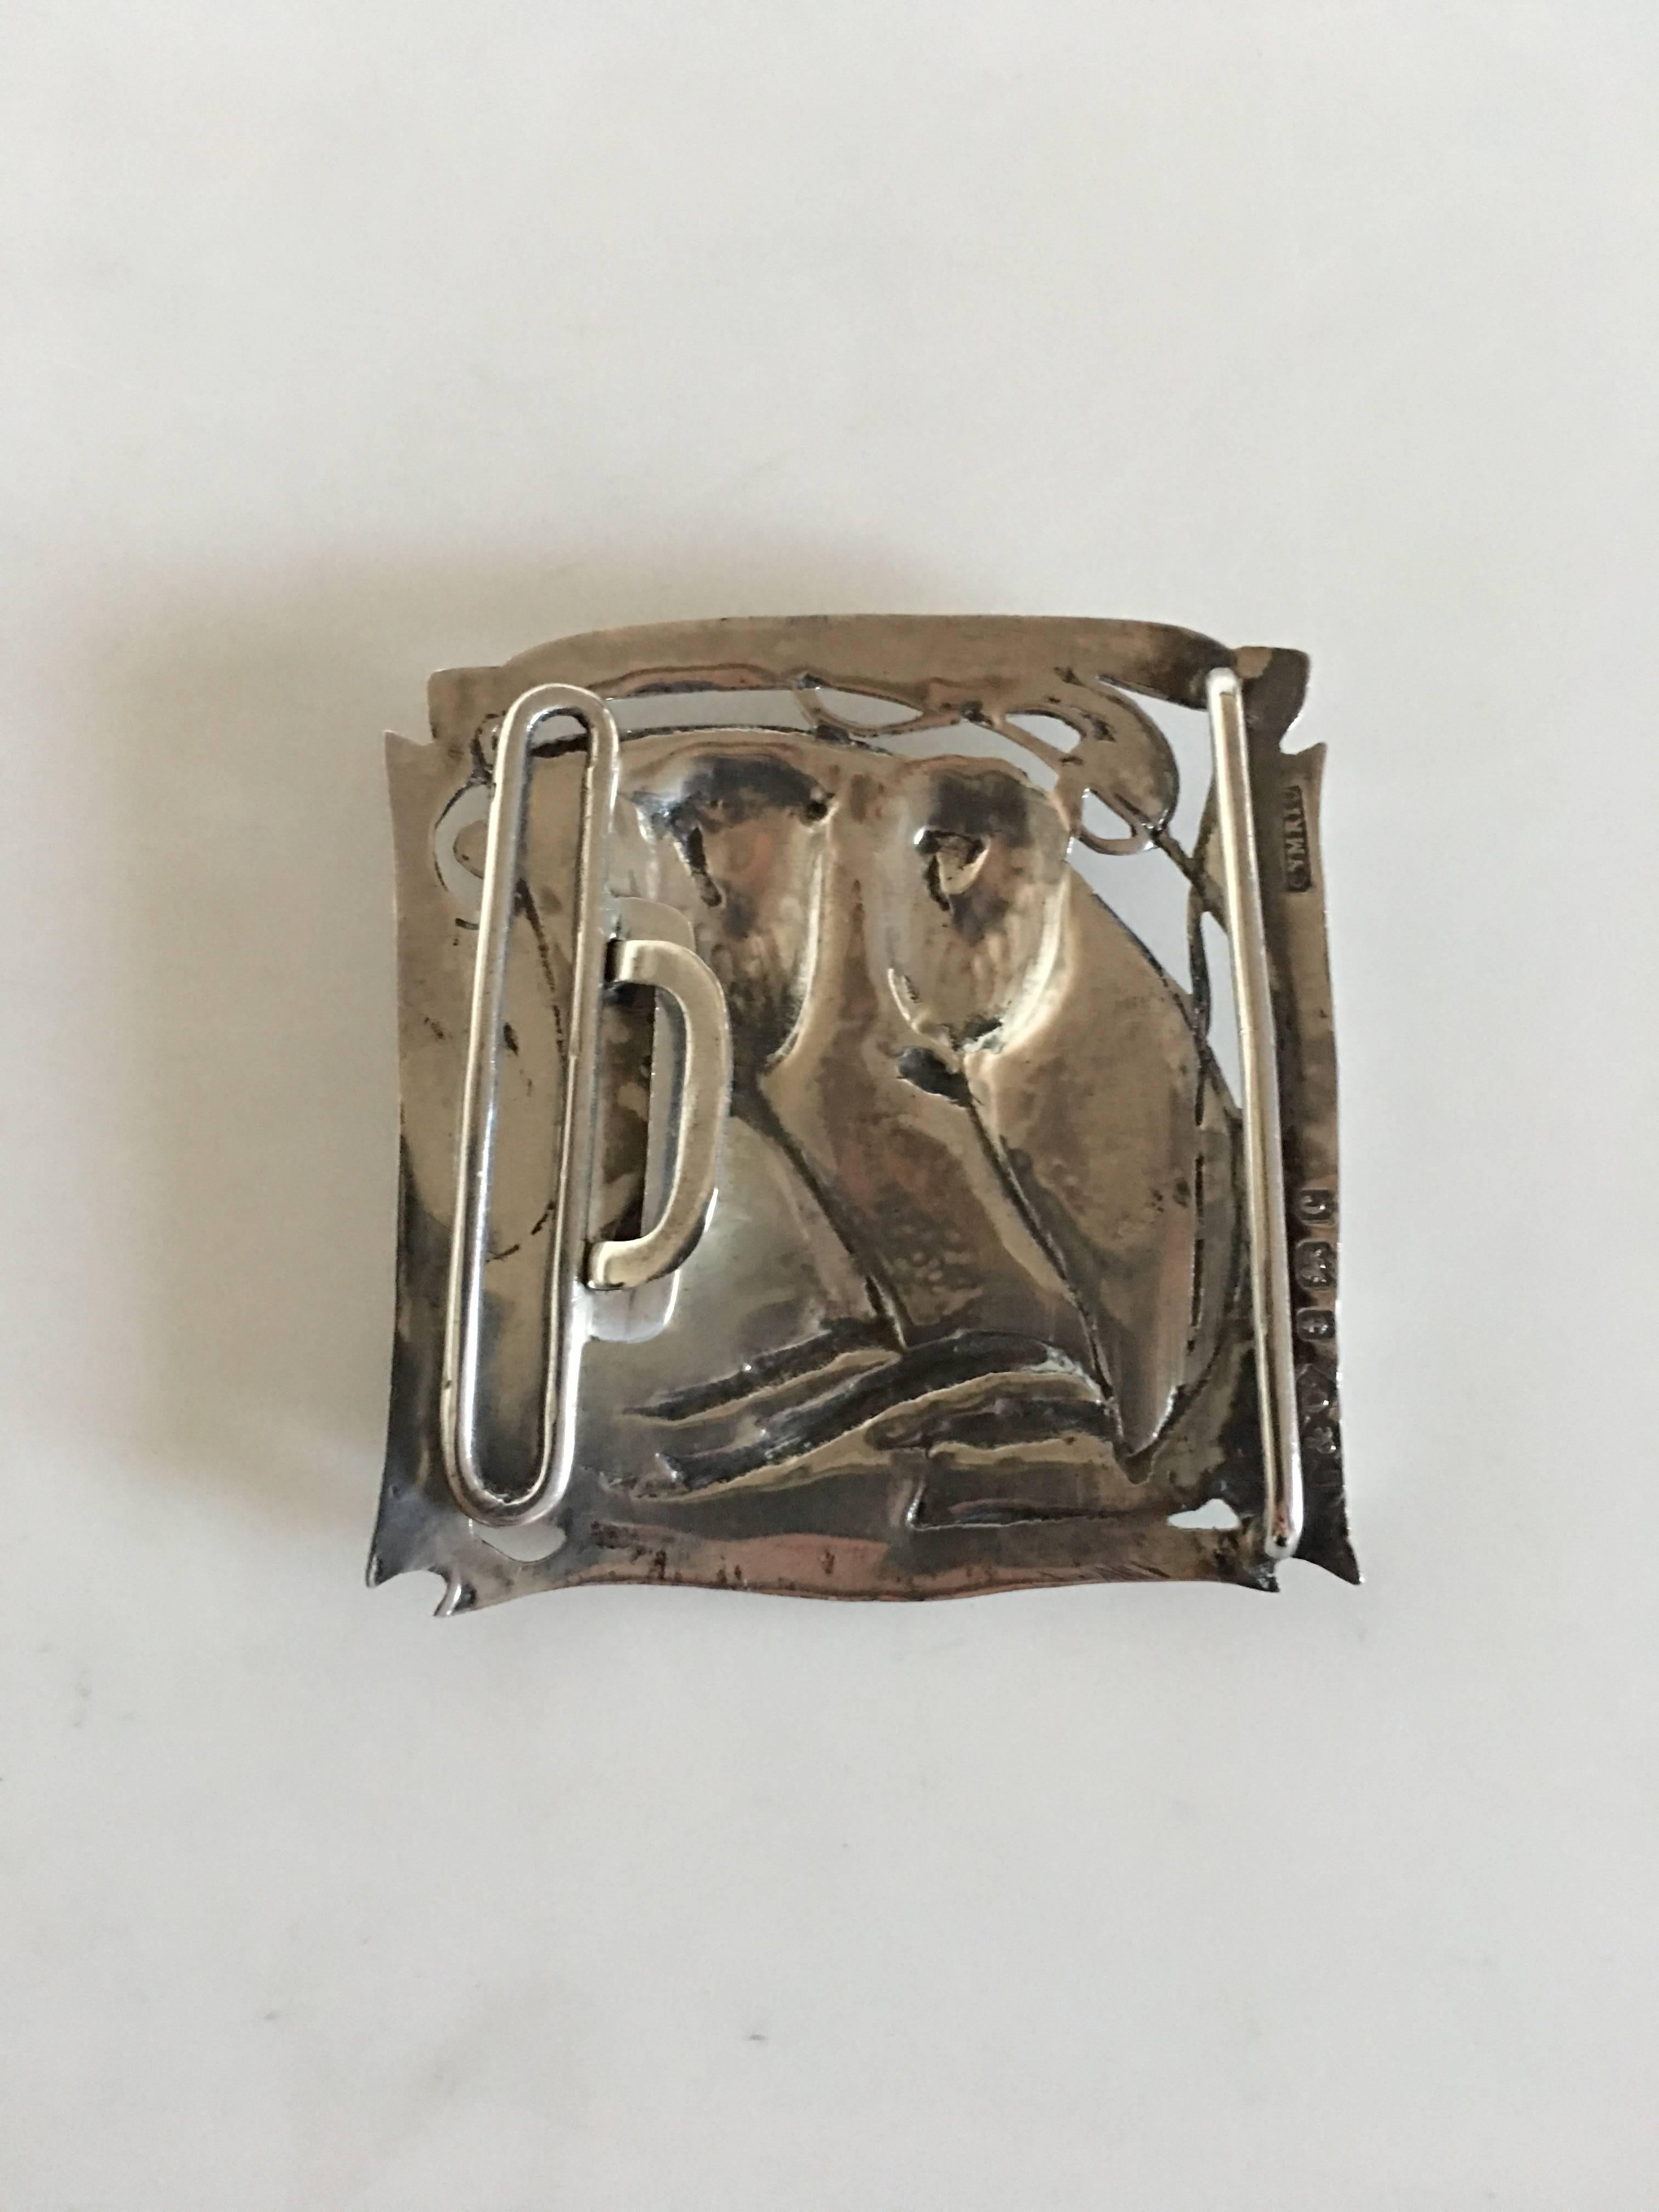 Arts & Crafts belt buckle with English silver marks. 6 x 6 cm (2 23/64